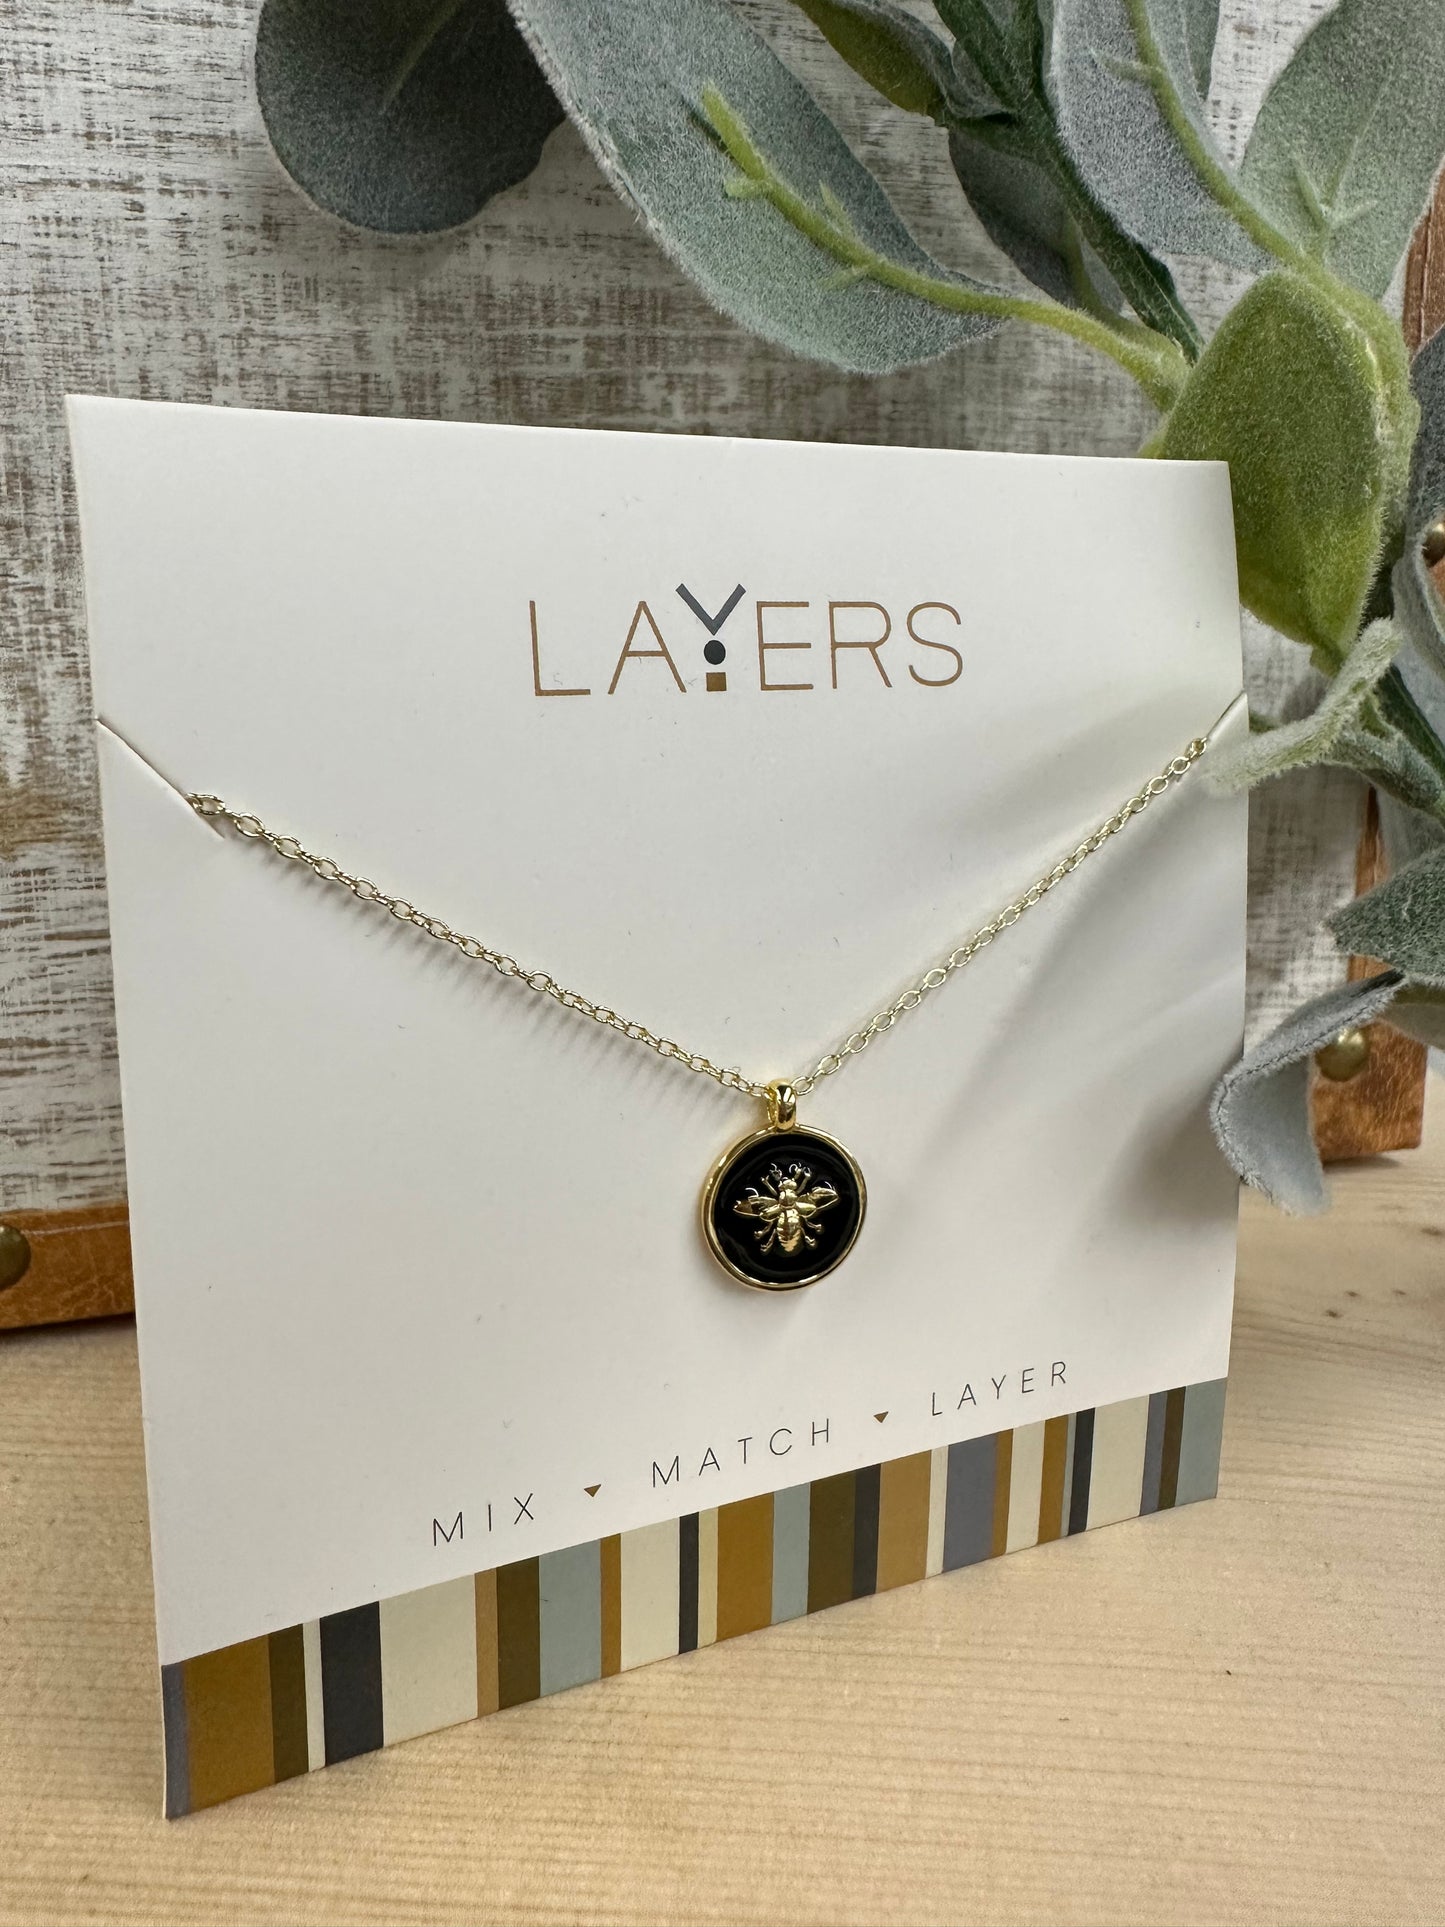 Layers Necklaces - Gold